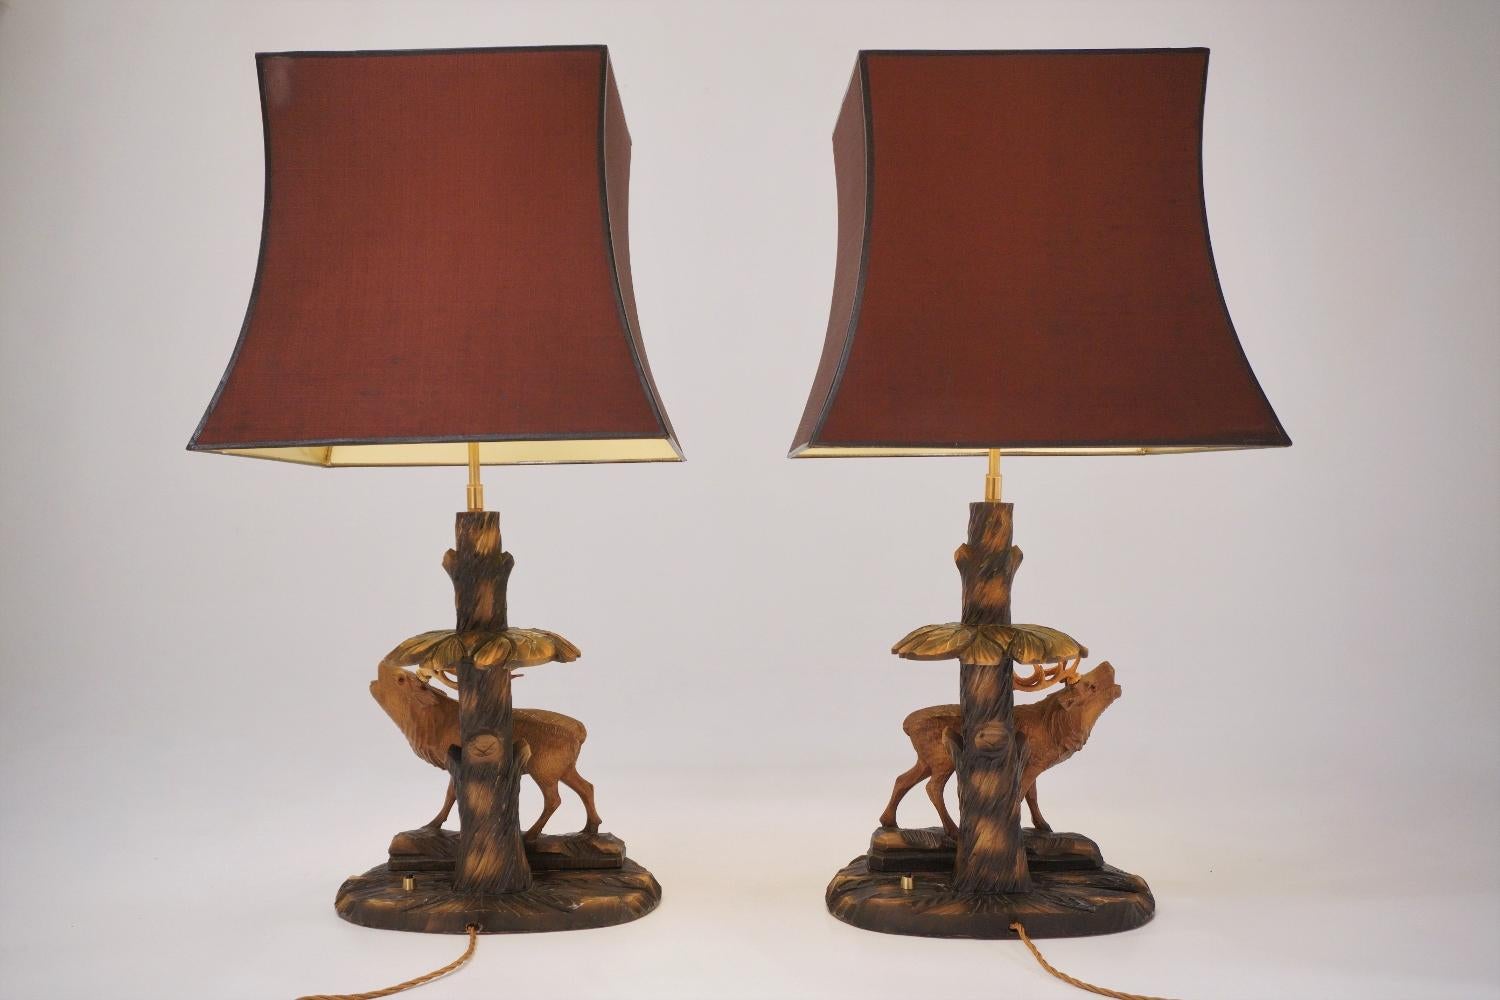 Mid-20th Century Deer Lamp, a Pair Black Forest Carving by Rhön Sepp 1940s, Germany For Sale